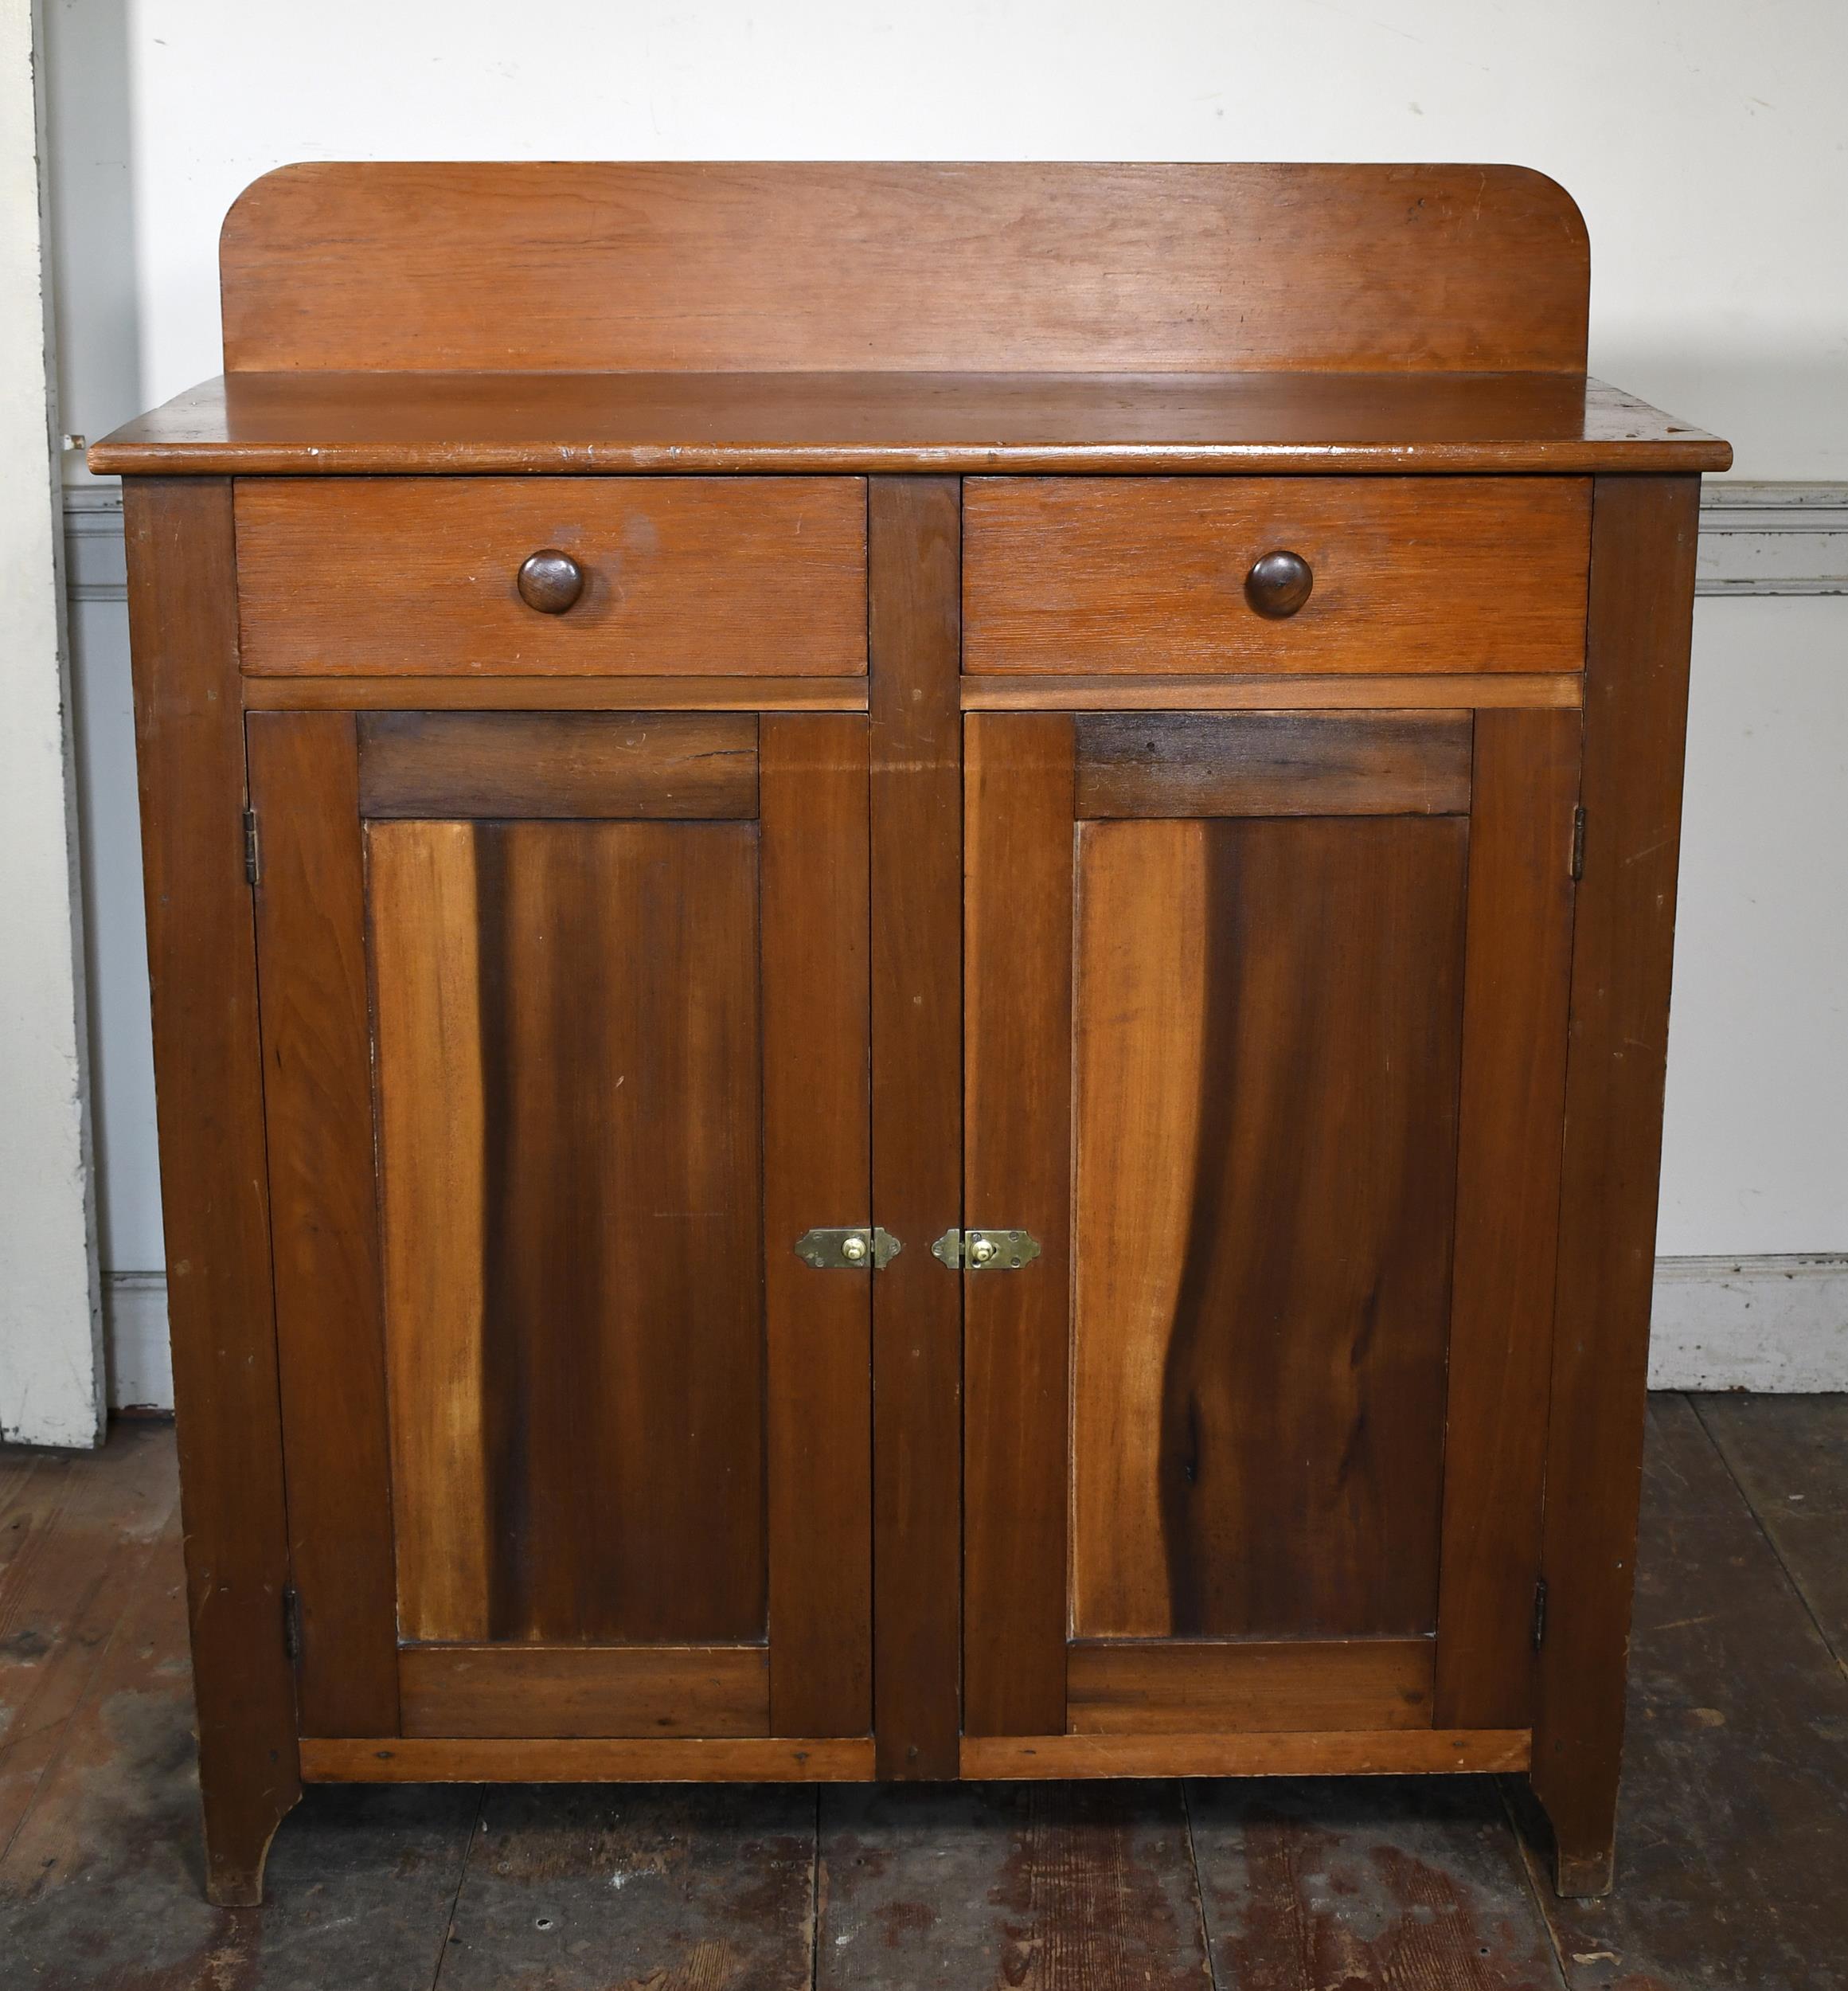 EARLY 19TH C. PA CHERRY JELLY CUPBOARD.